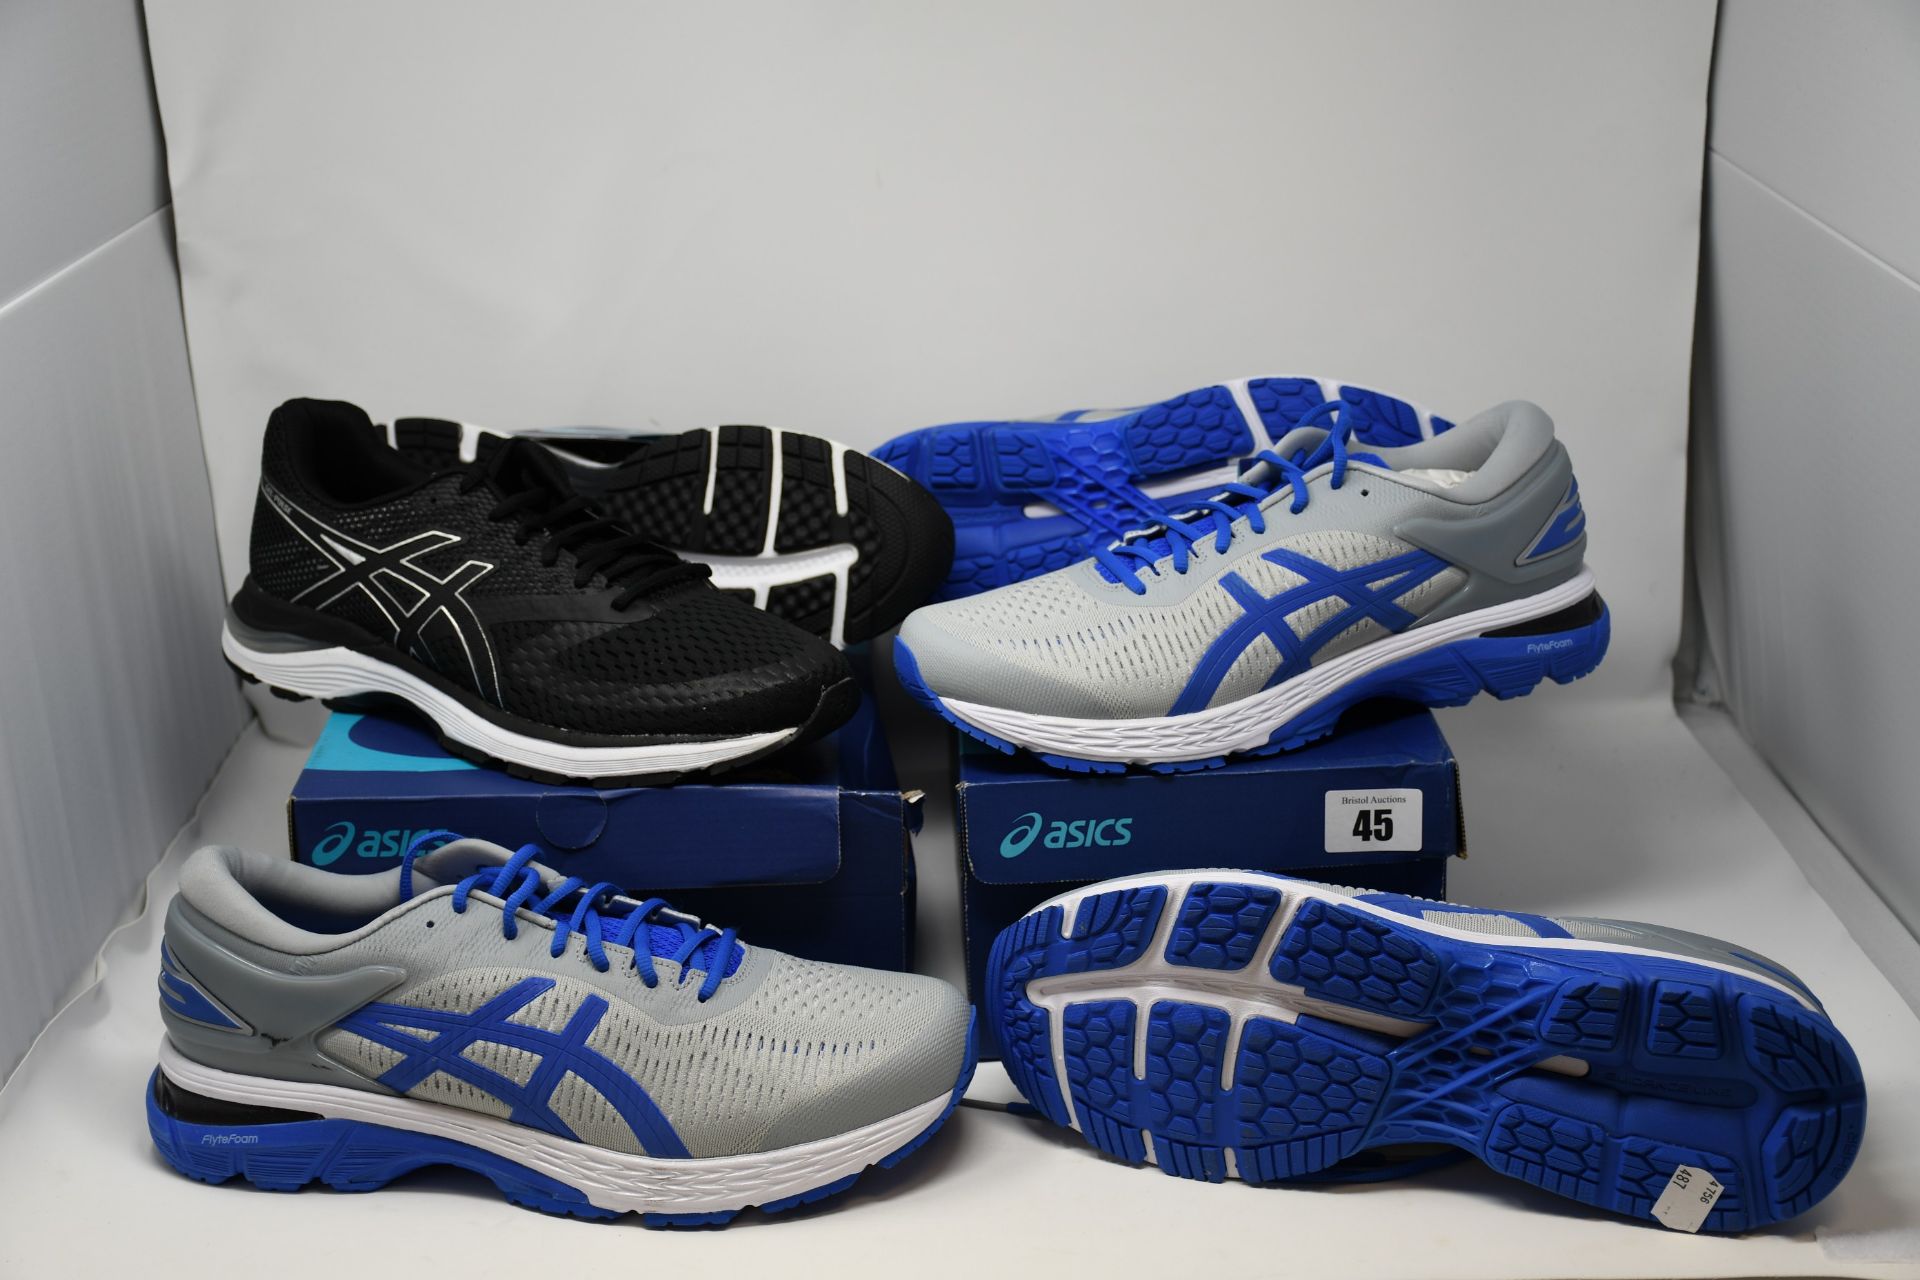 One as new Asics Gel-Kayano 25 Lite-show size US 11.5 (No box). One as new Asics Gel-Kayano 25